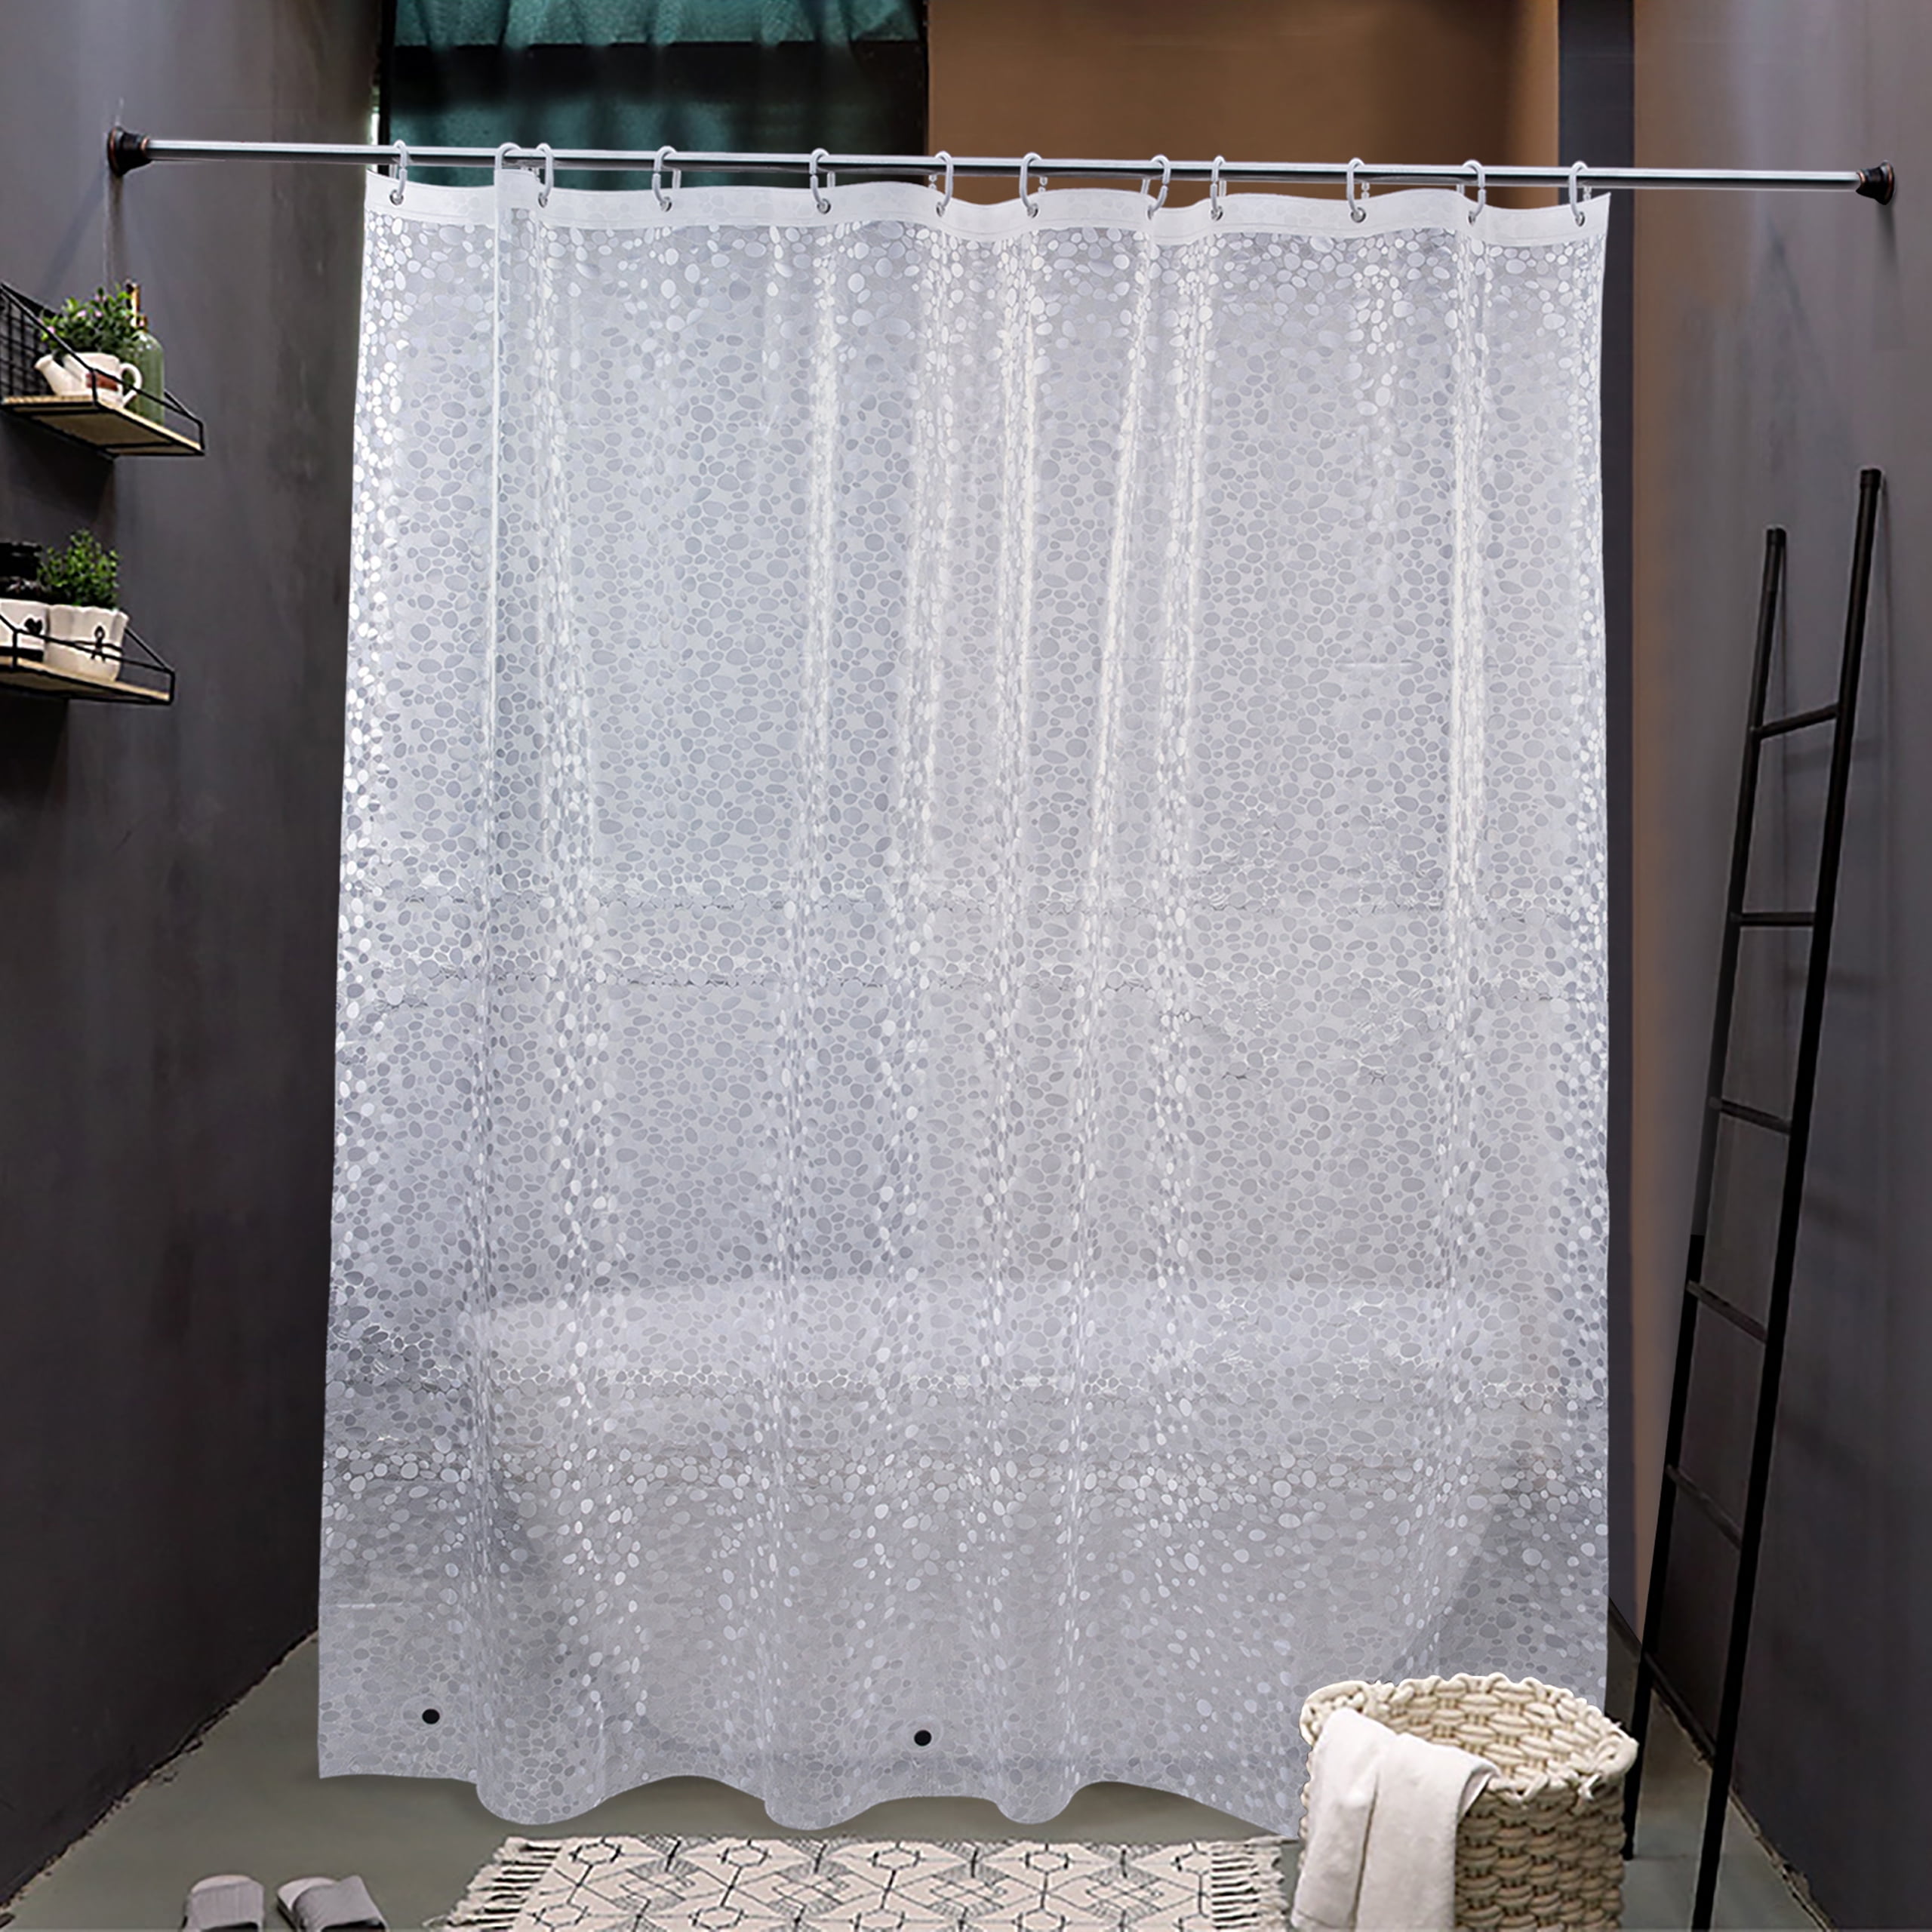 NTBAY Eva Semi-Transparent Clear Shower Curtain with Diamond, Water-Repellent Liner with 3 Magnets for Bathroom, 72x72 Inches